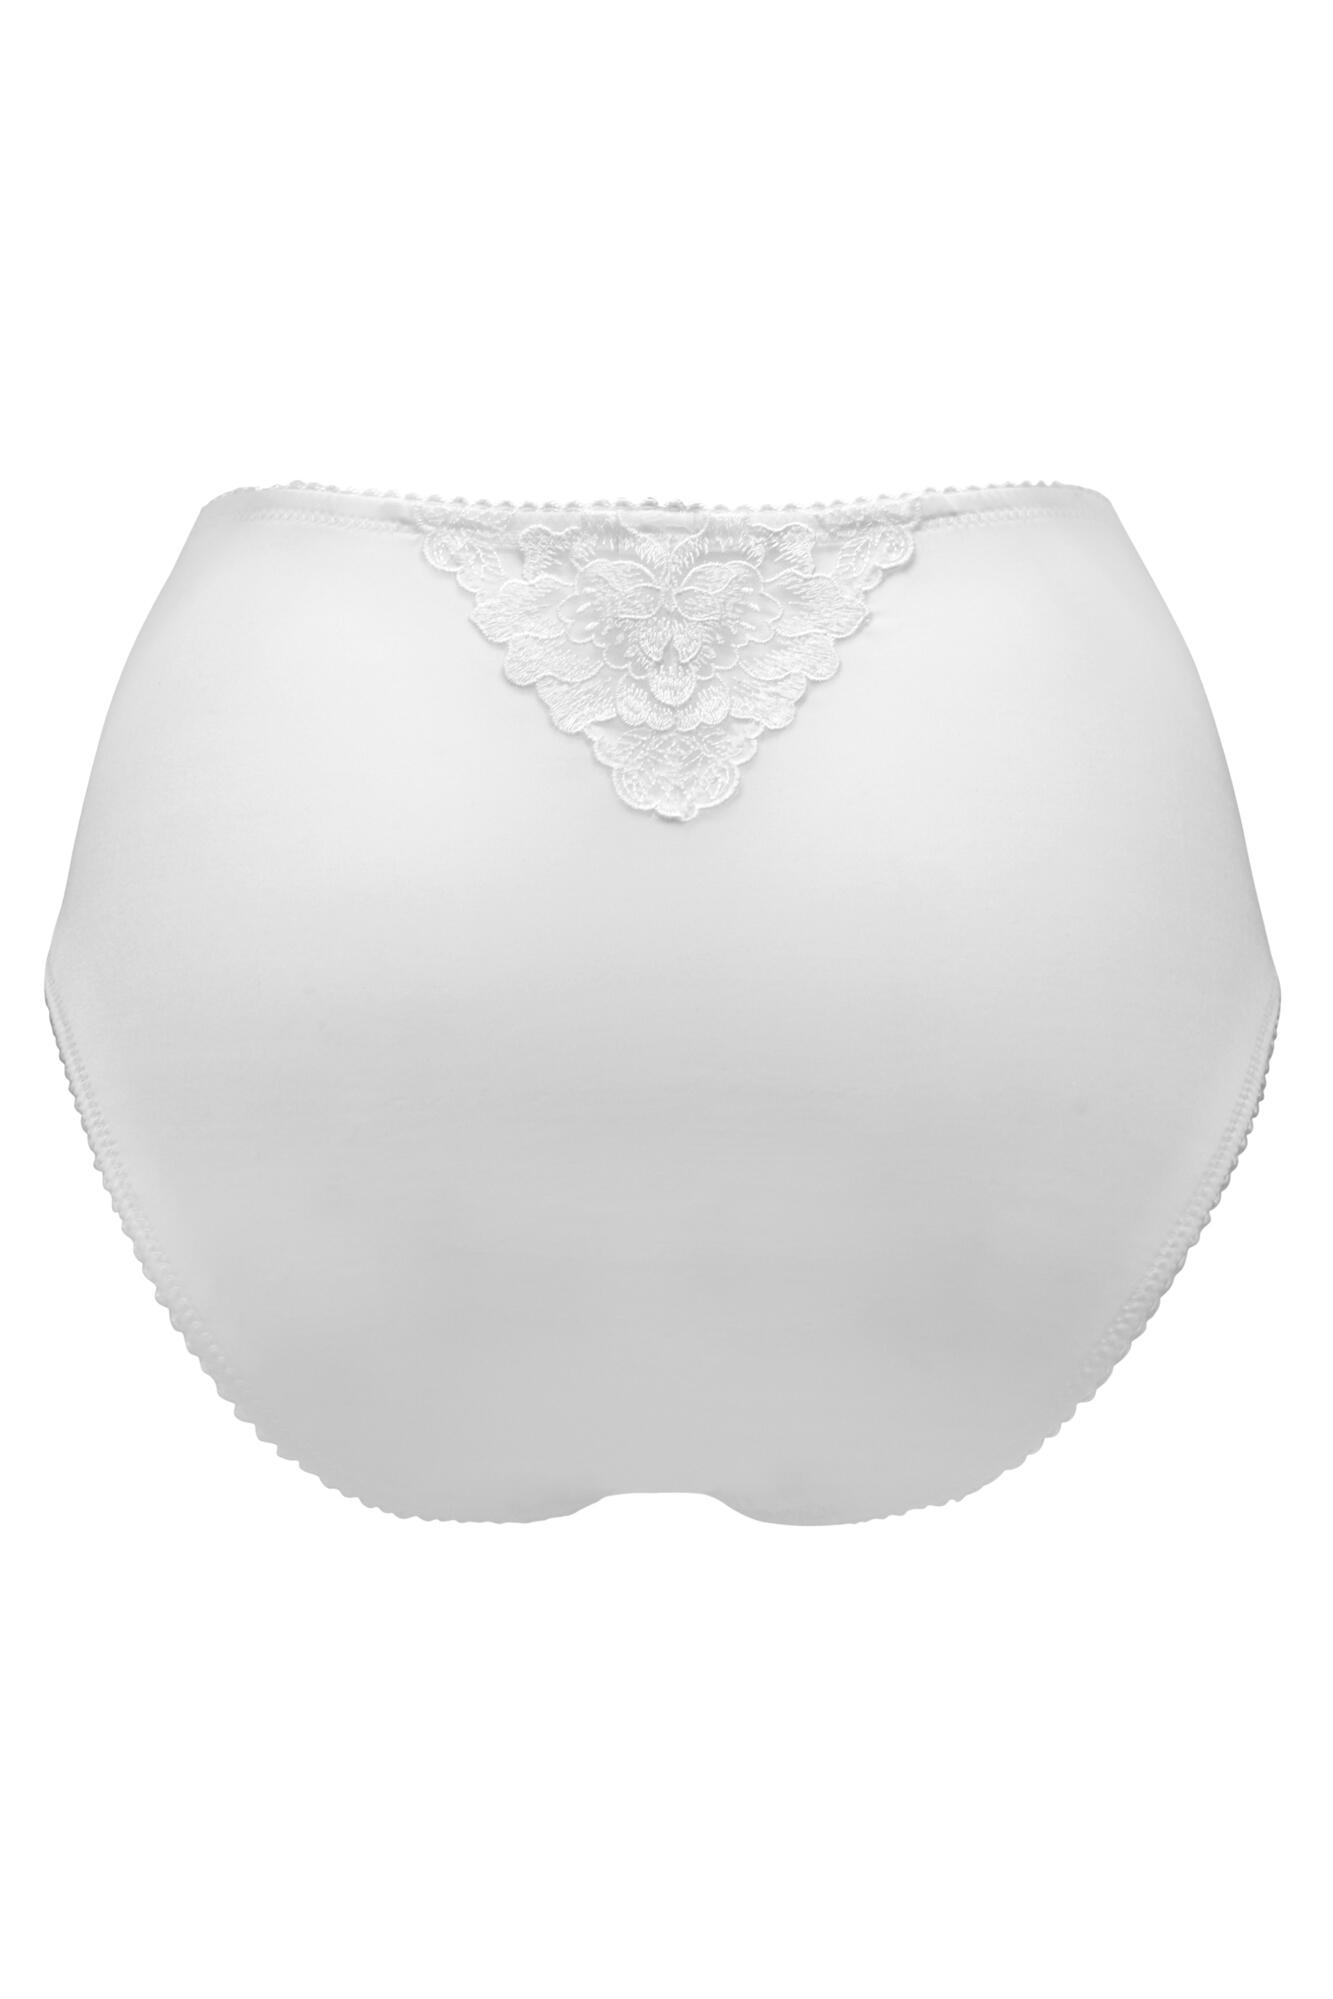 Pour Moi Sofia Lace Embroidered Side Support Bra